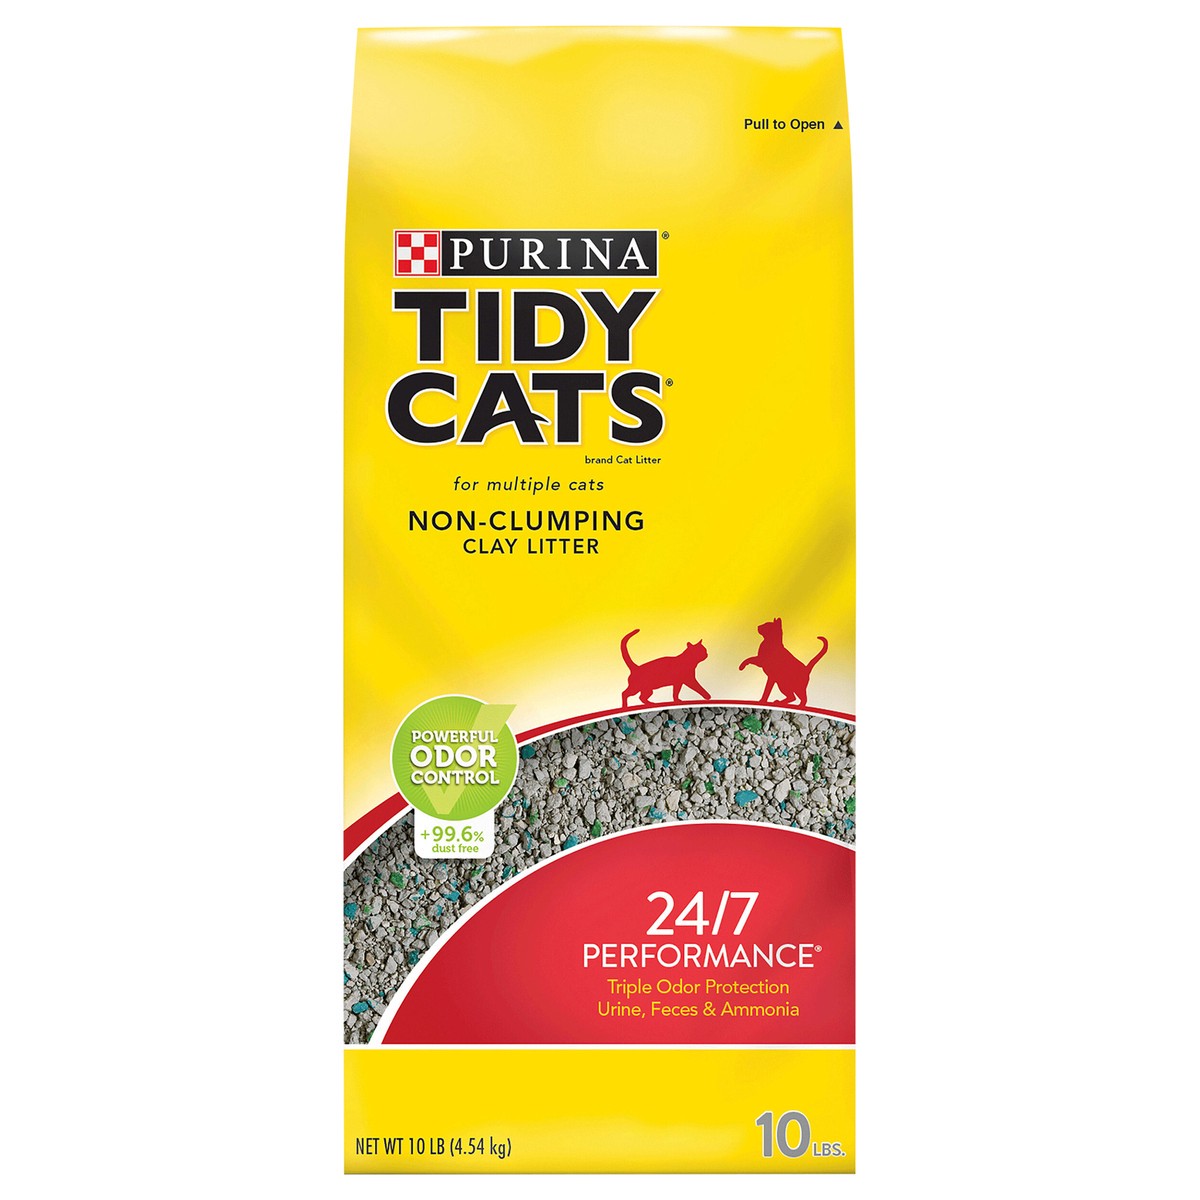 slide 1 of 9, Tidy Cats Purina Tidy Cats Non Clumping Cat Litter, 24/7 Performance Multi Cat Litter, 10 lb